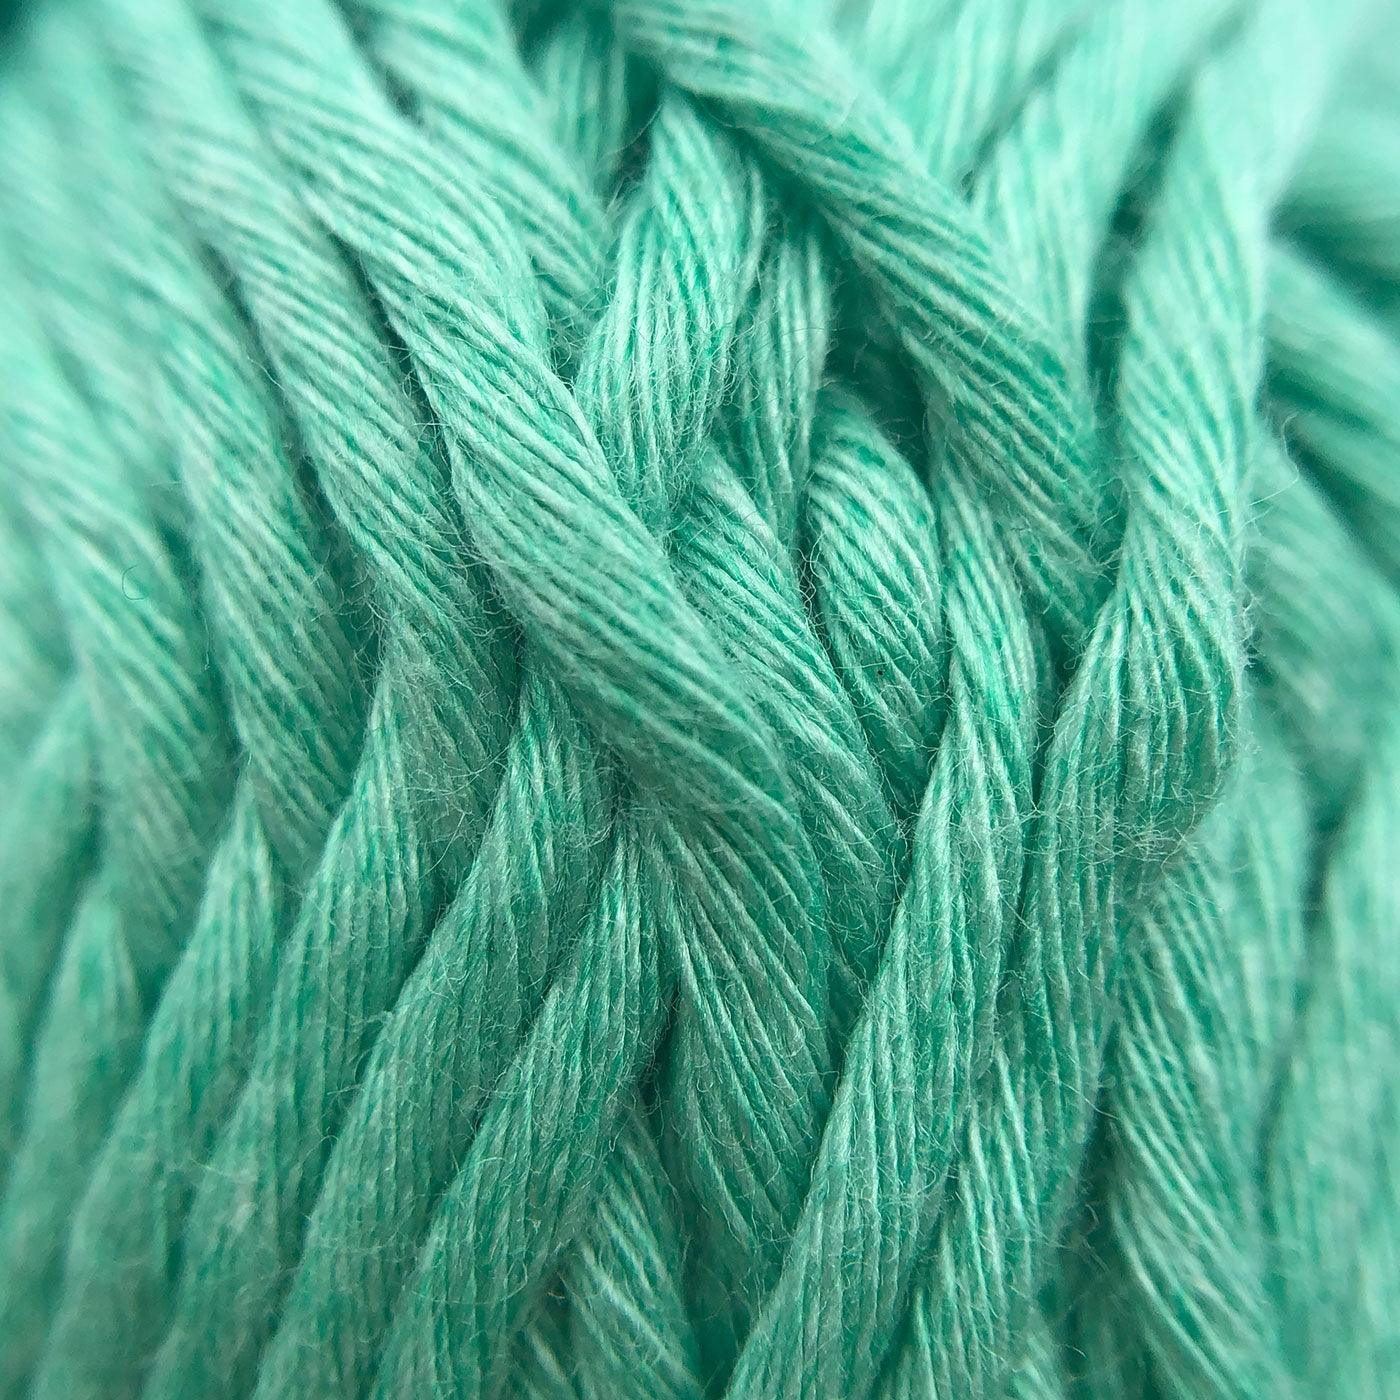 Premium Glow-in-the-Dark Yarn（10 color package) Experience the enchantment of our Premium Glow-in-the-Dark Yarn. Versatile and luminous, it adds a captivating glow to crafts, creating radiant masterpieces. $31.99